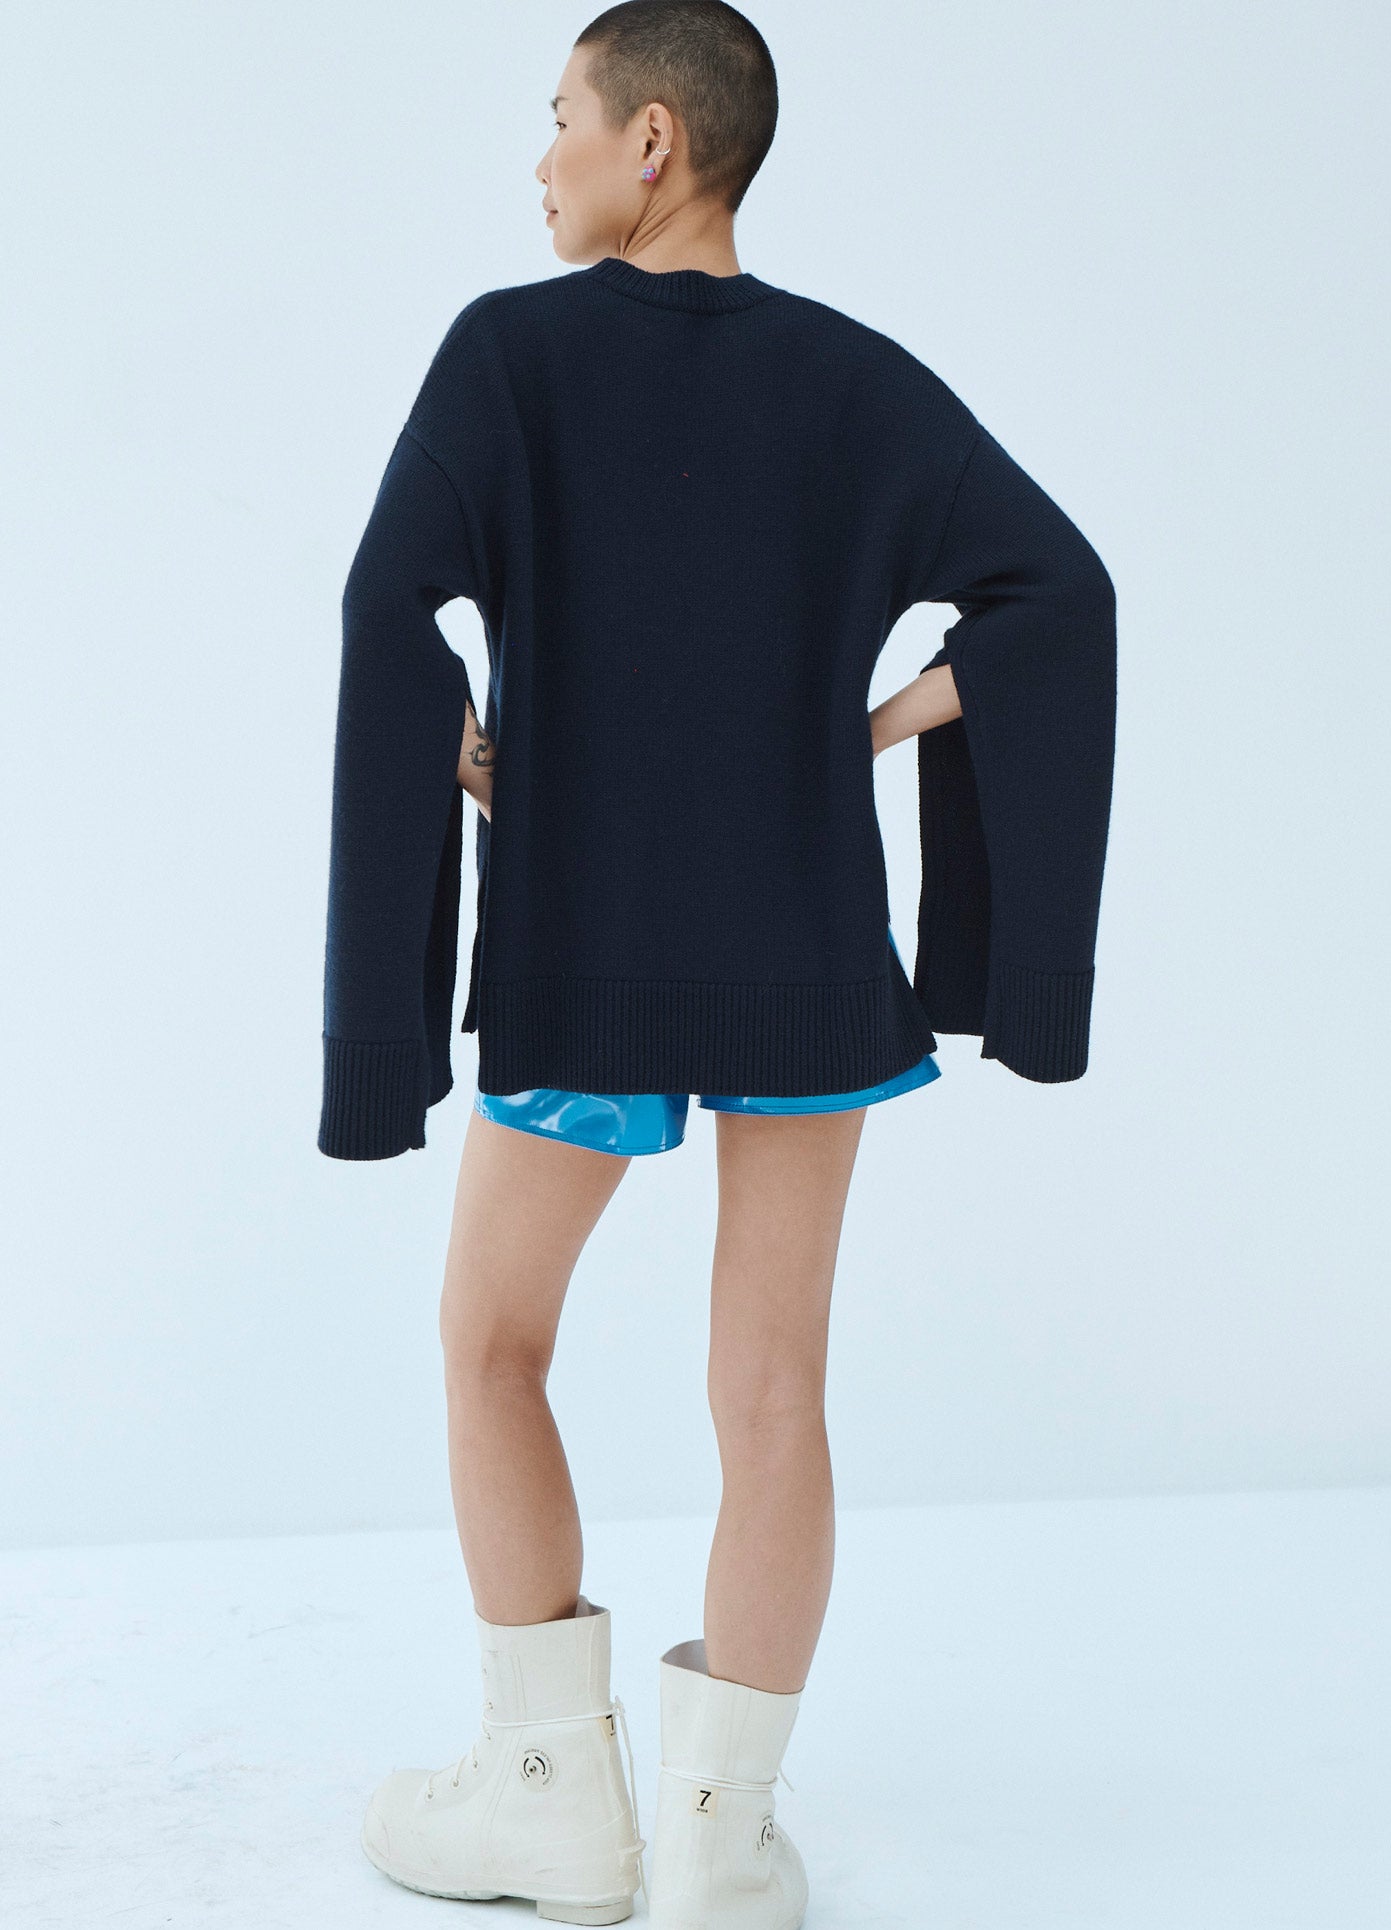 MONSE Bunny Intarsia Sweater in Midnight on Model Back View